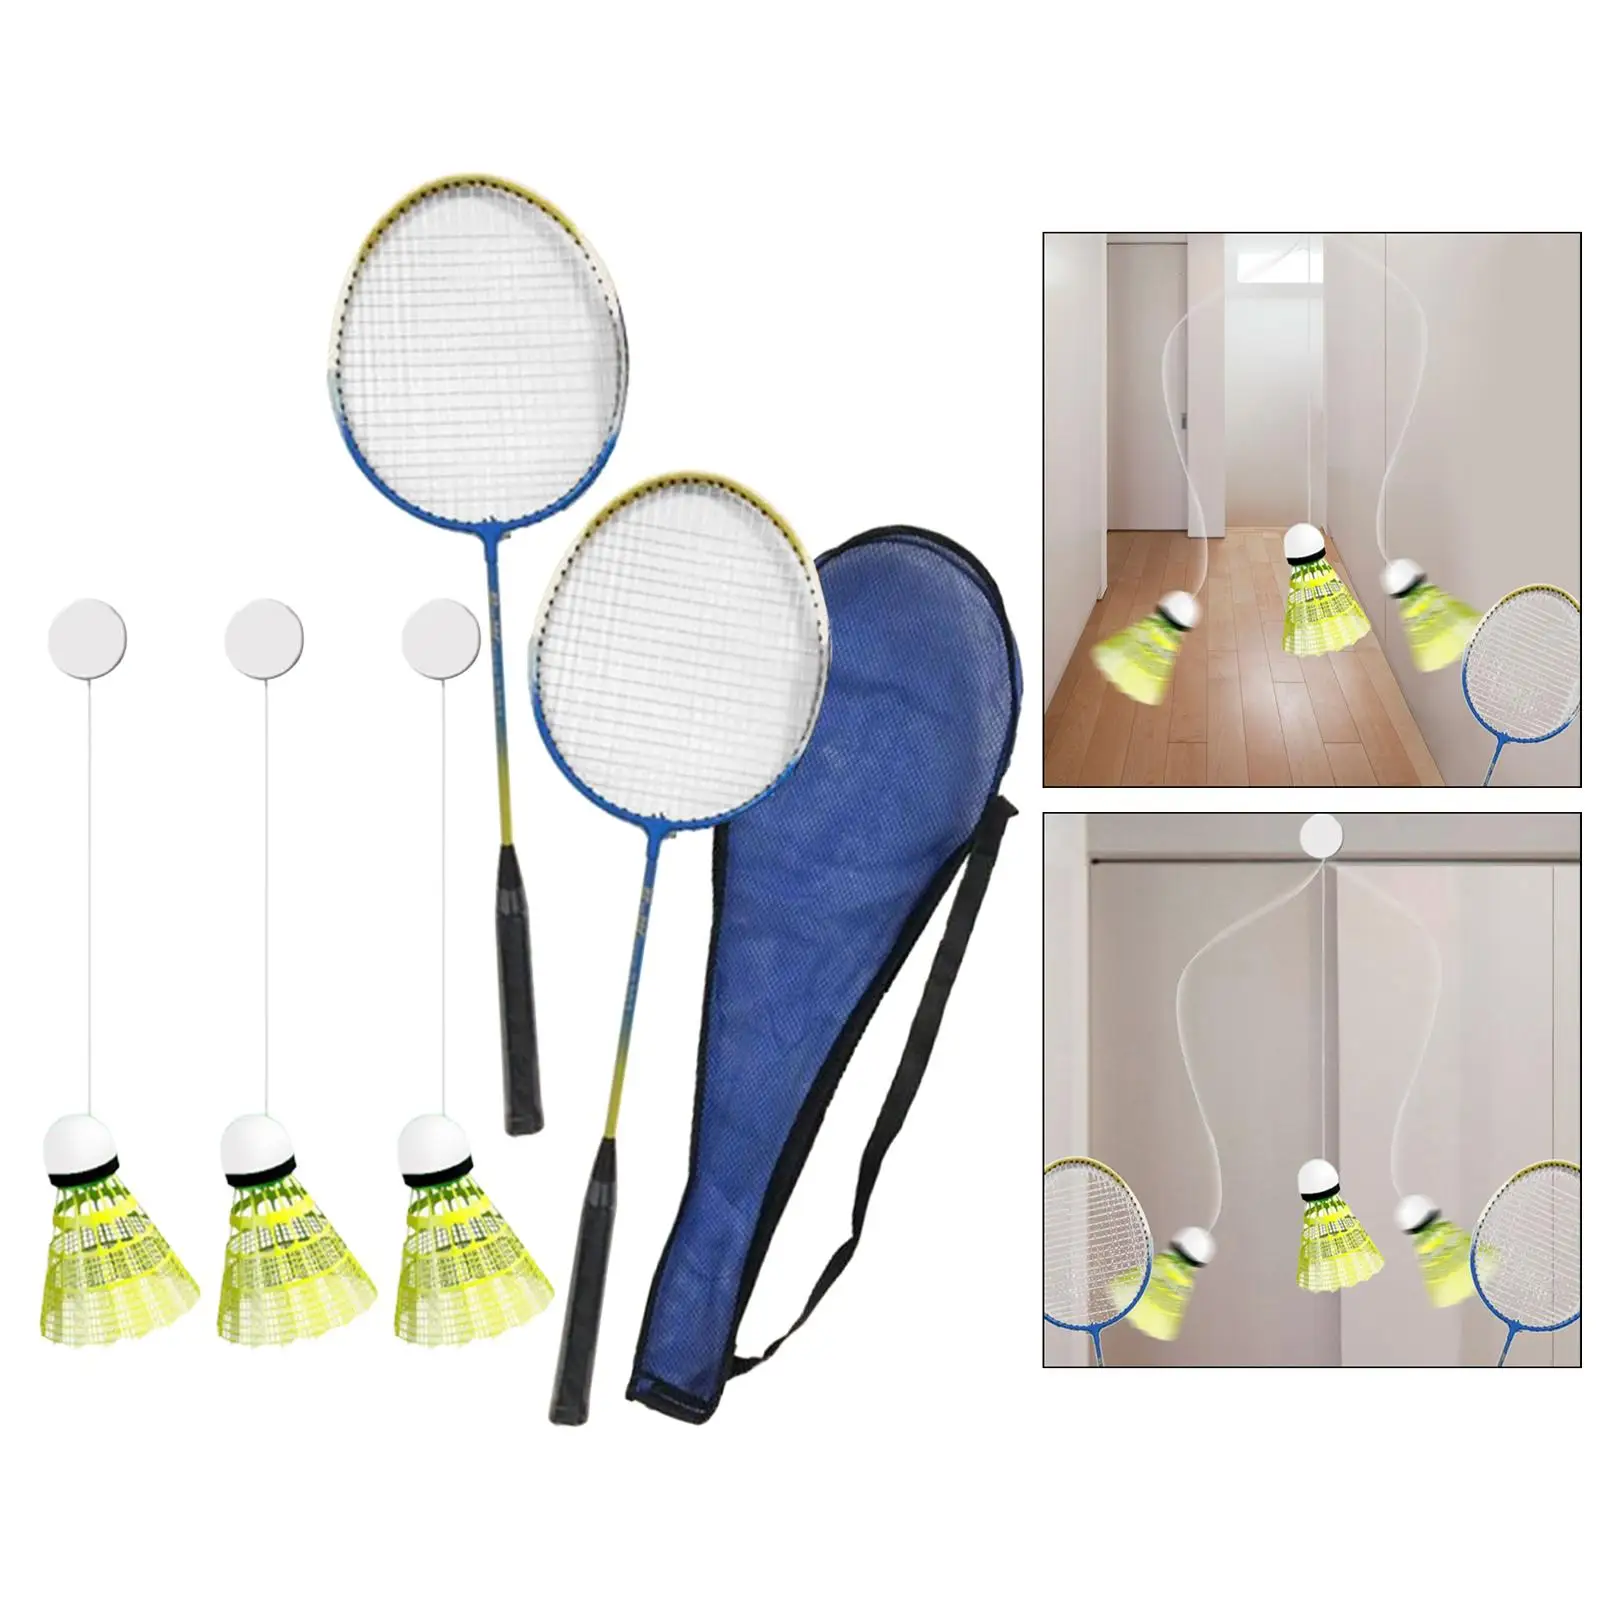 Badminton Solo Trainer Adjustable Height Aid with Shuttlecock Self Practice Trainer Badminton Training for Sports Fitness Home